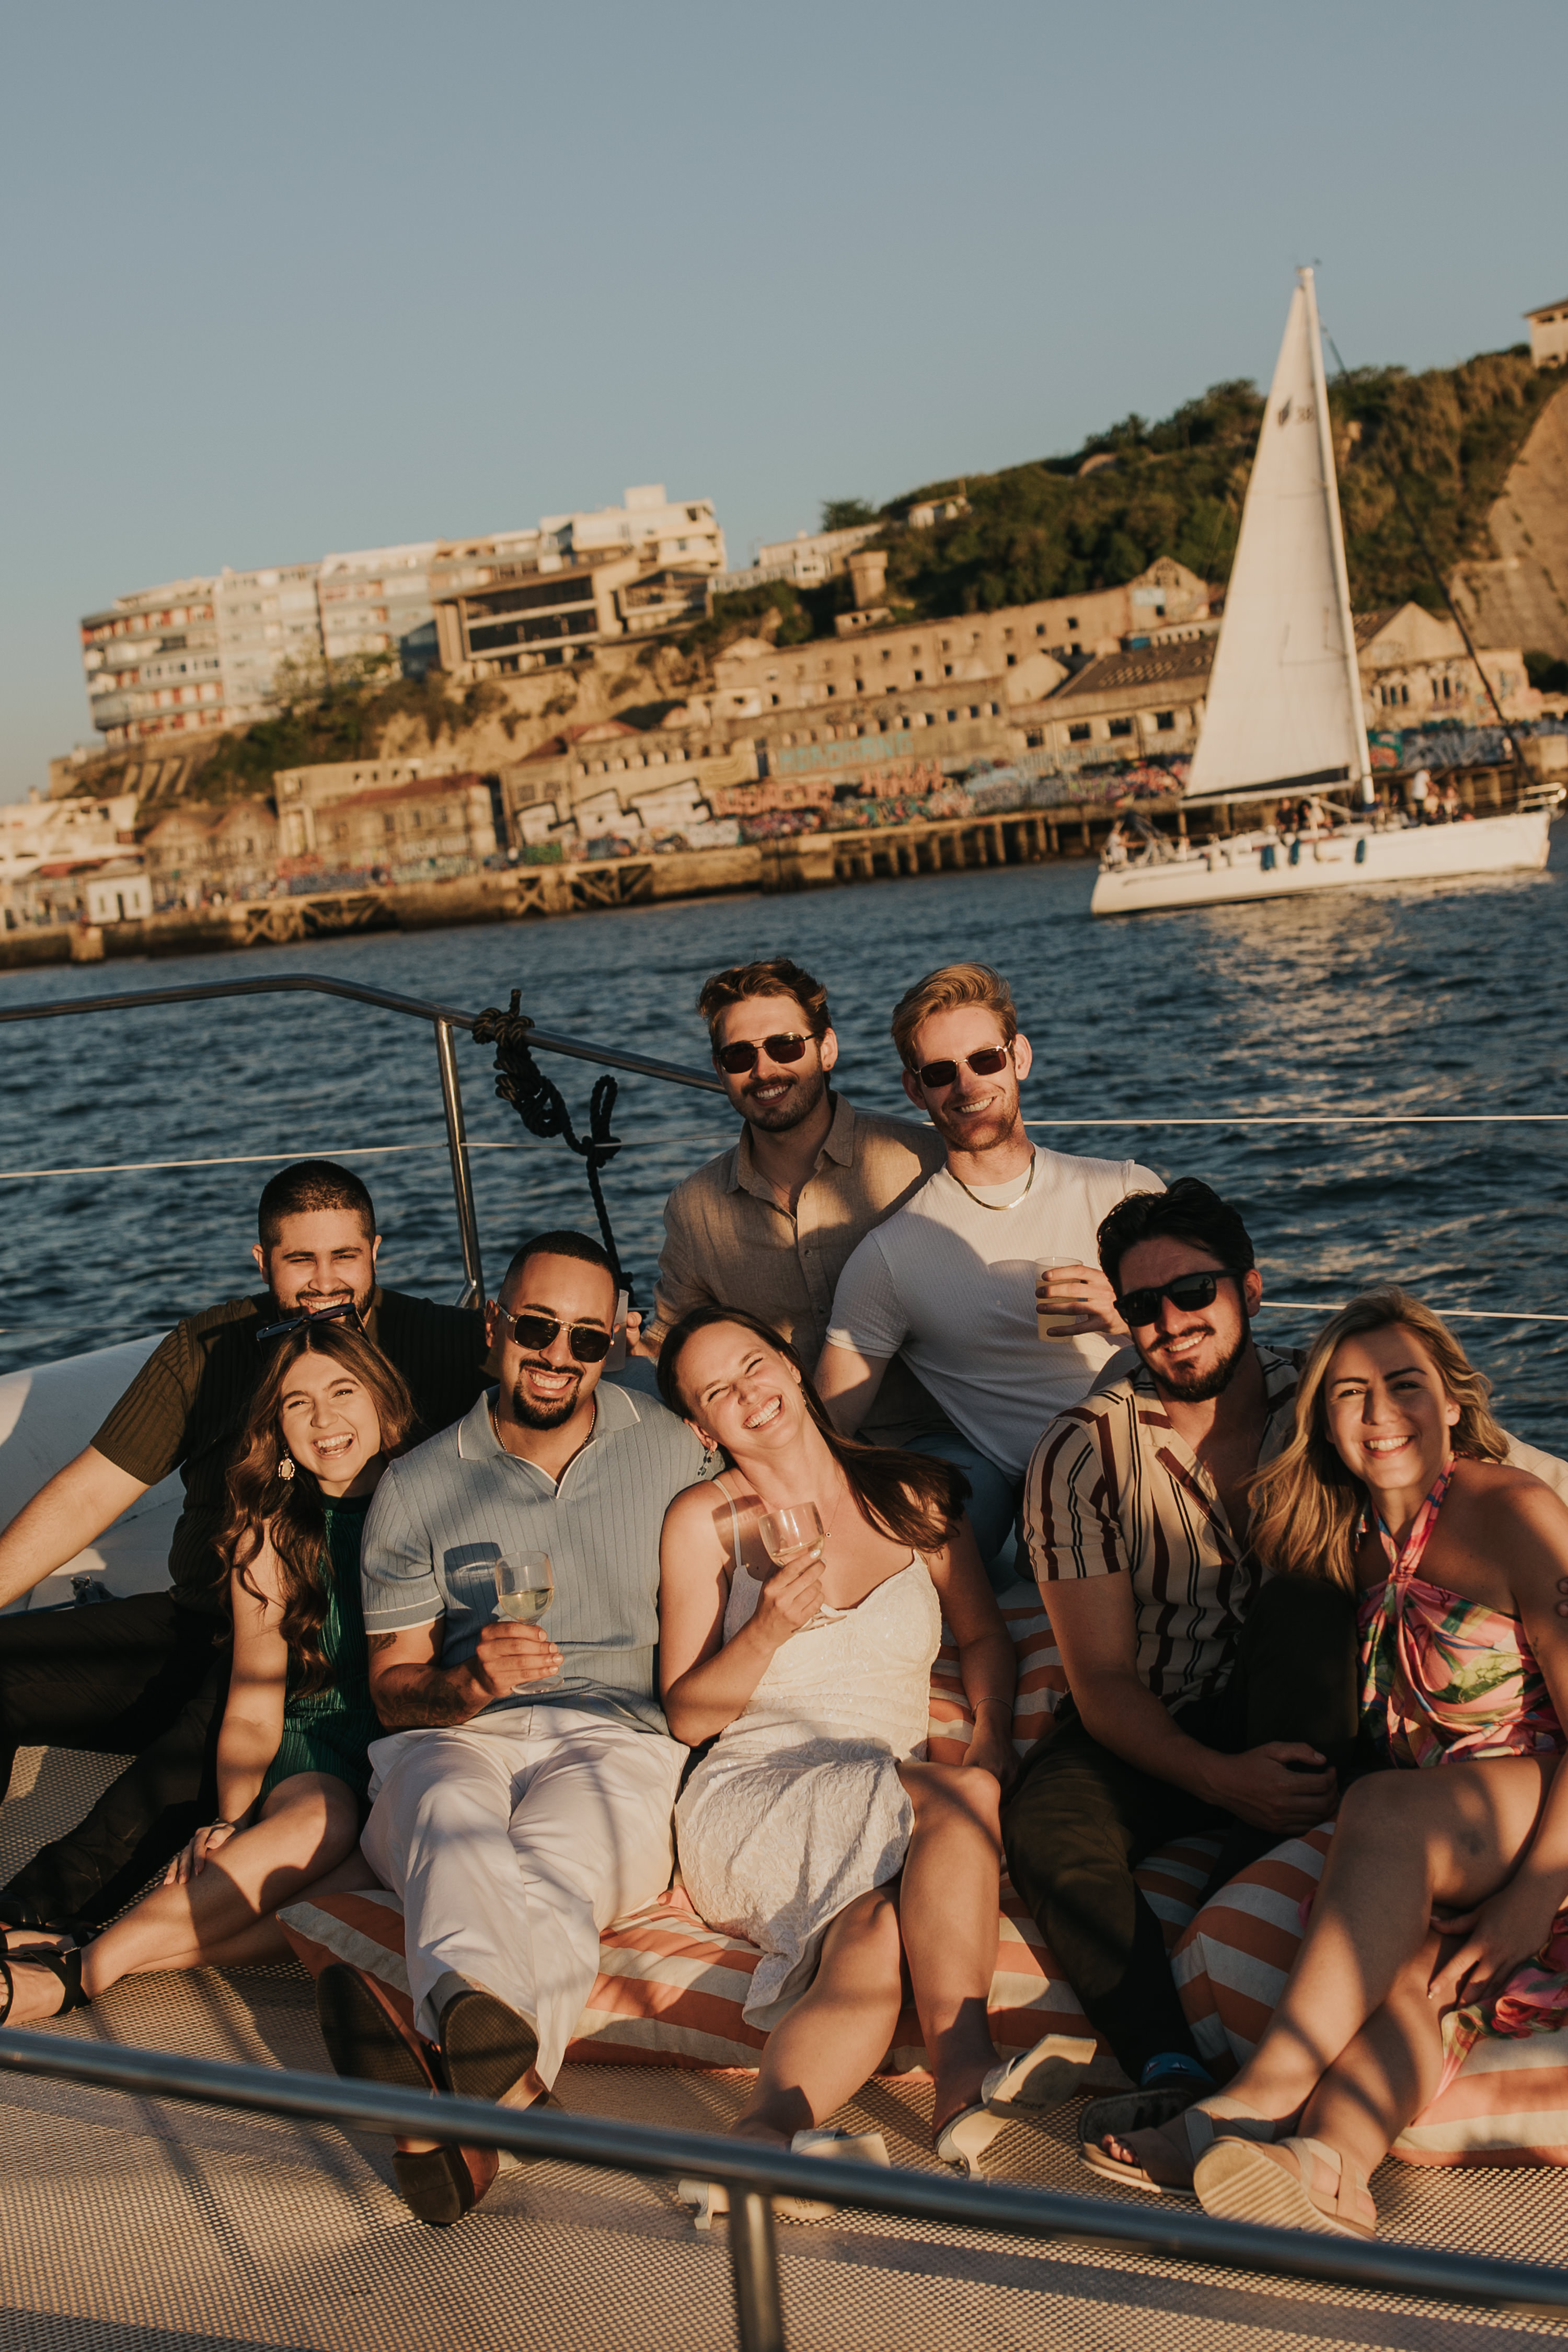 Boat charter in Lisbon for your group
